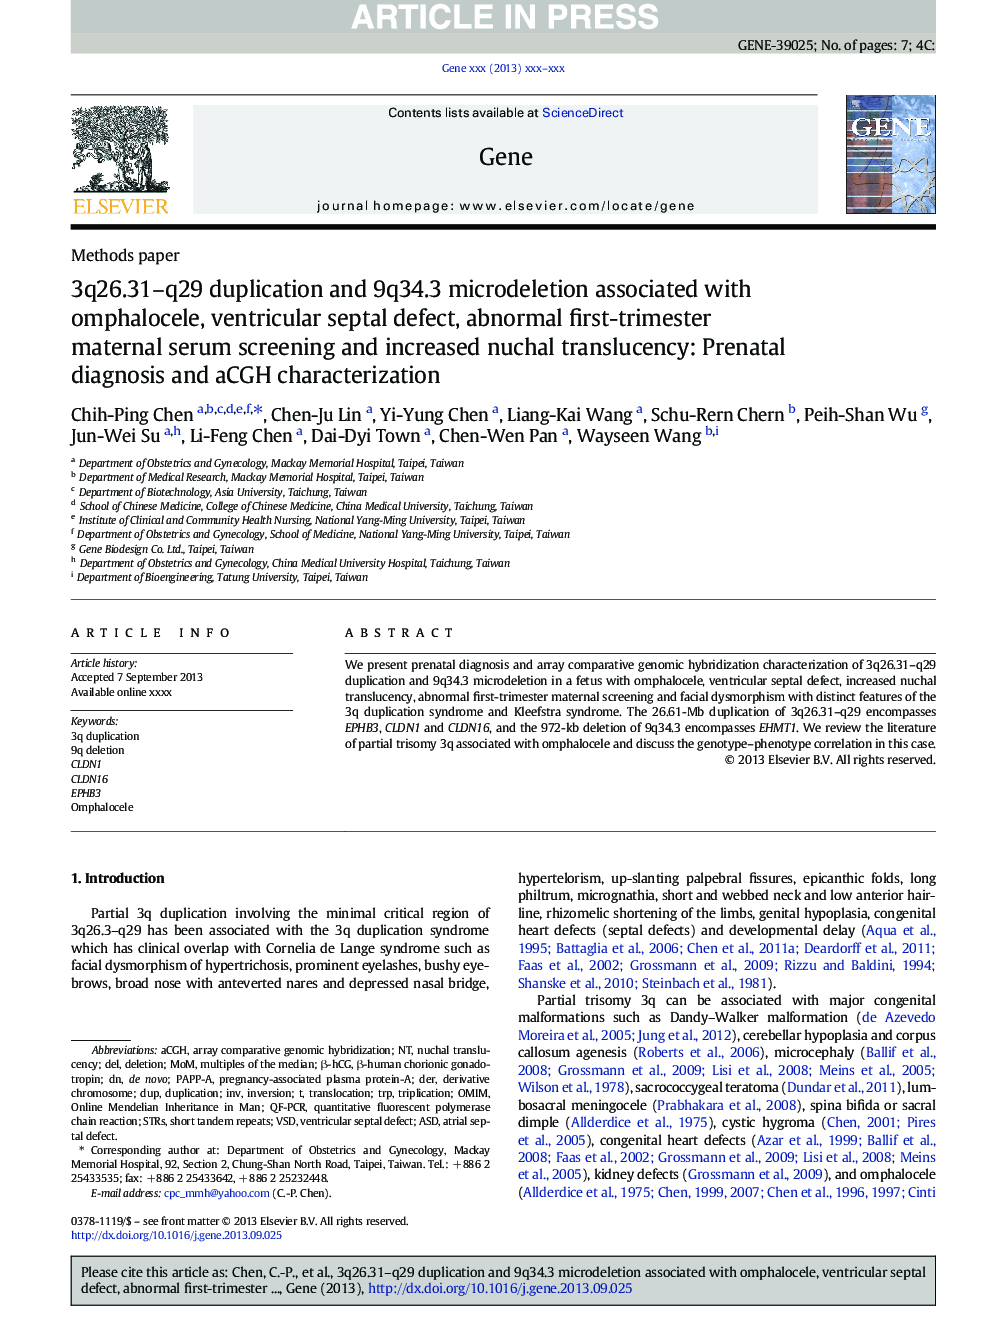 3q26.31-q29 duplication and 9q34.3 microdeletion associated with omphalocele, ventricular septal defect, abnormal first-trimester maternal serum screening and increased nuchal translucency: Prenatal diagnosis and aCGH characterization